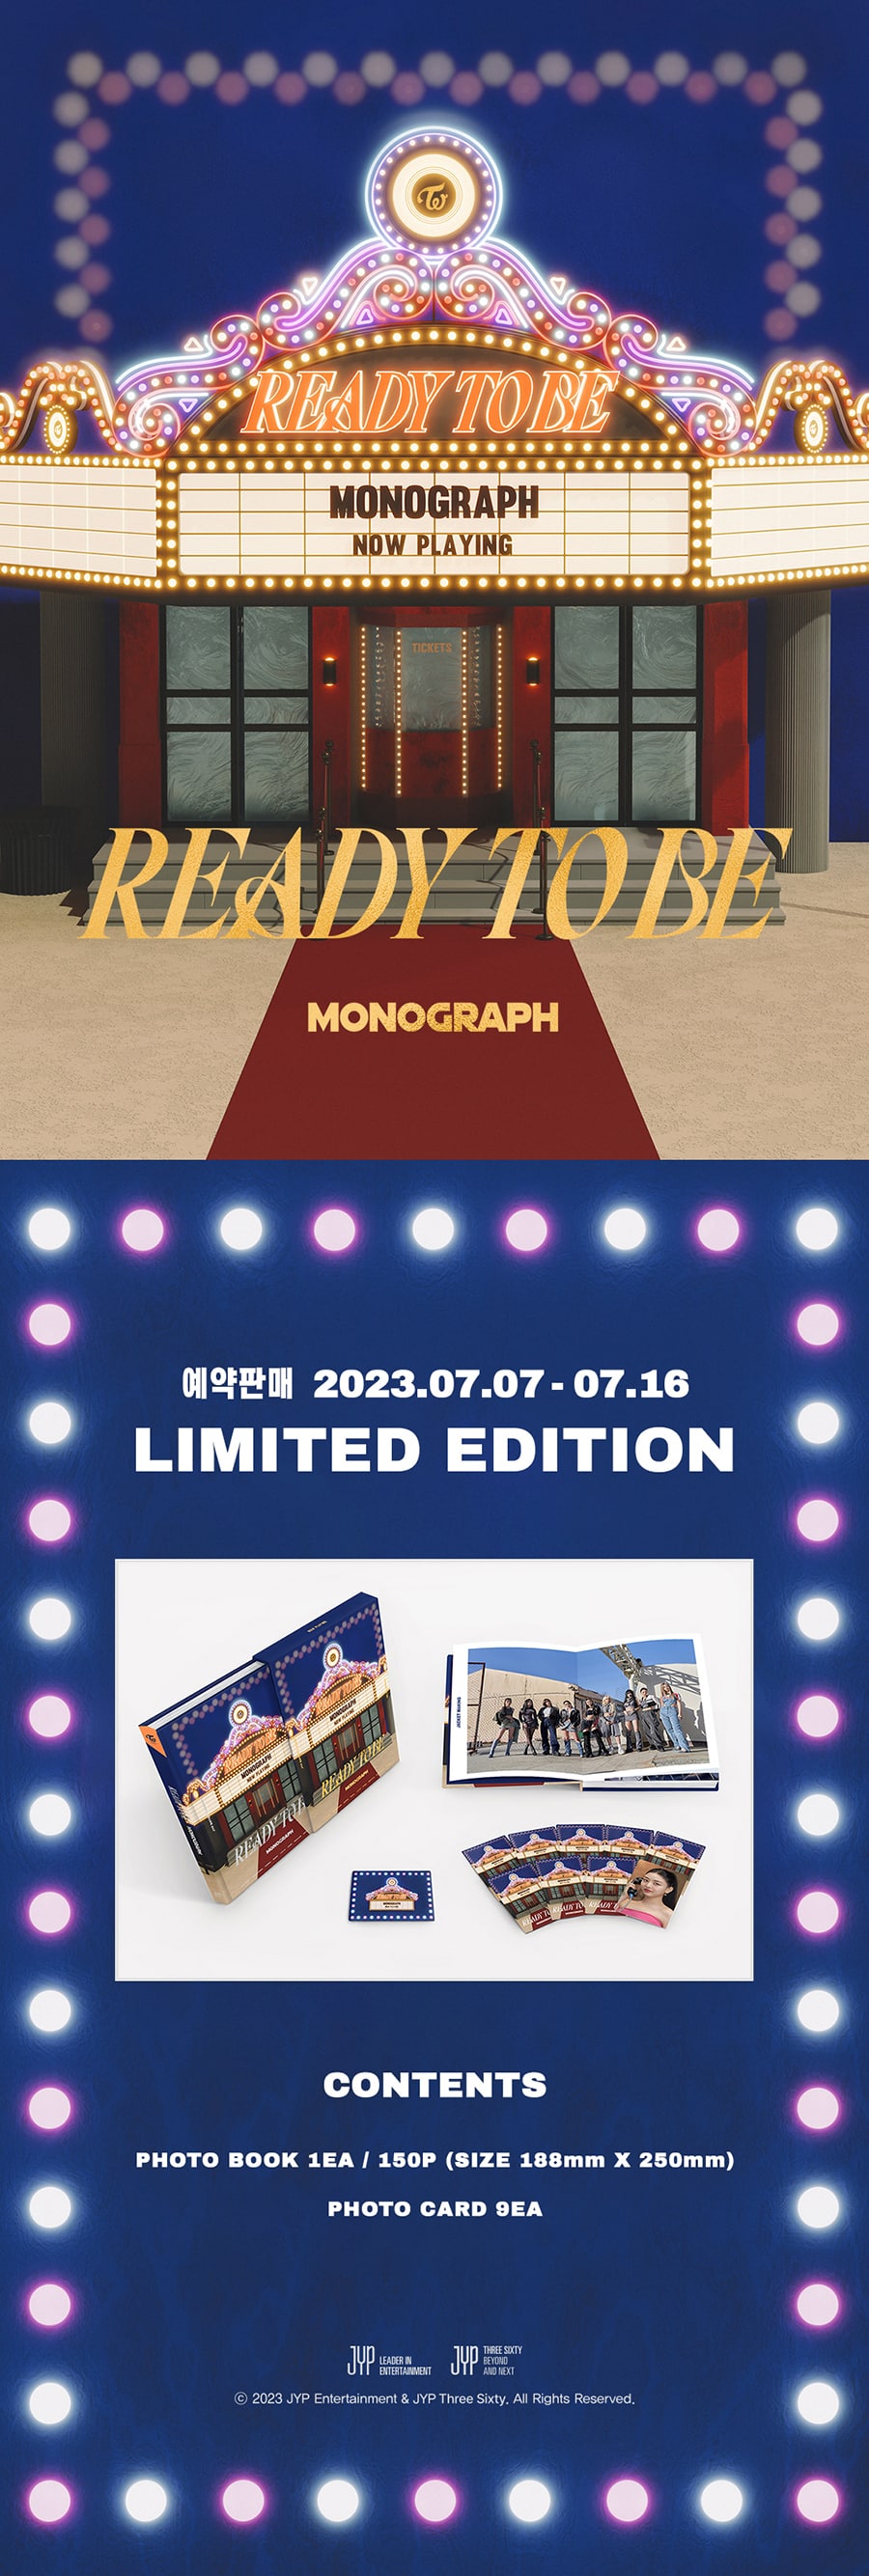 twice-ready-to-be-monograph-between-wholesales